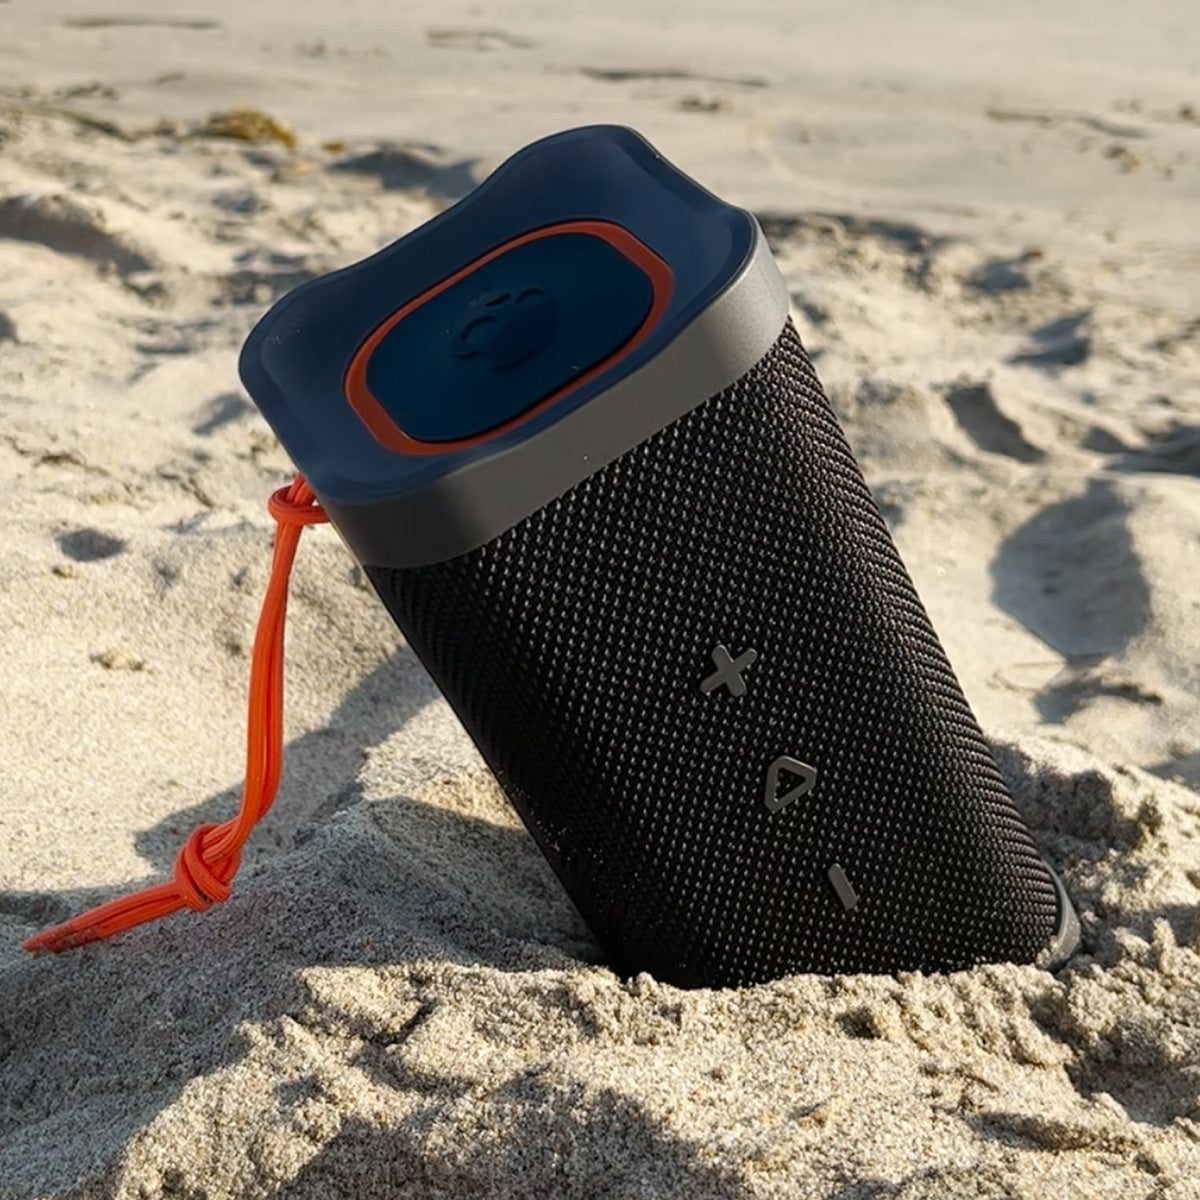 Meet Terrain Wireless Bluetooth Speaker - the new must-have portable audio  device